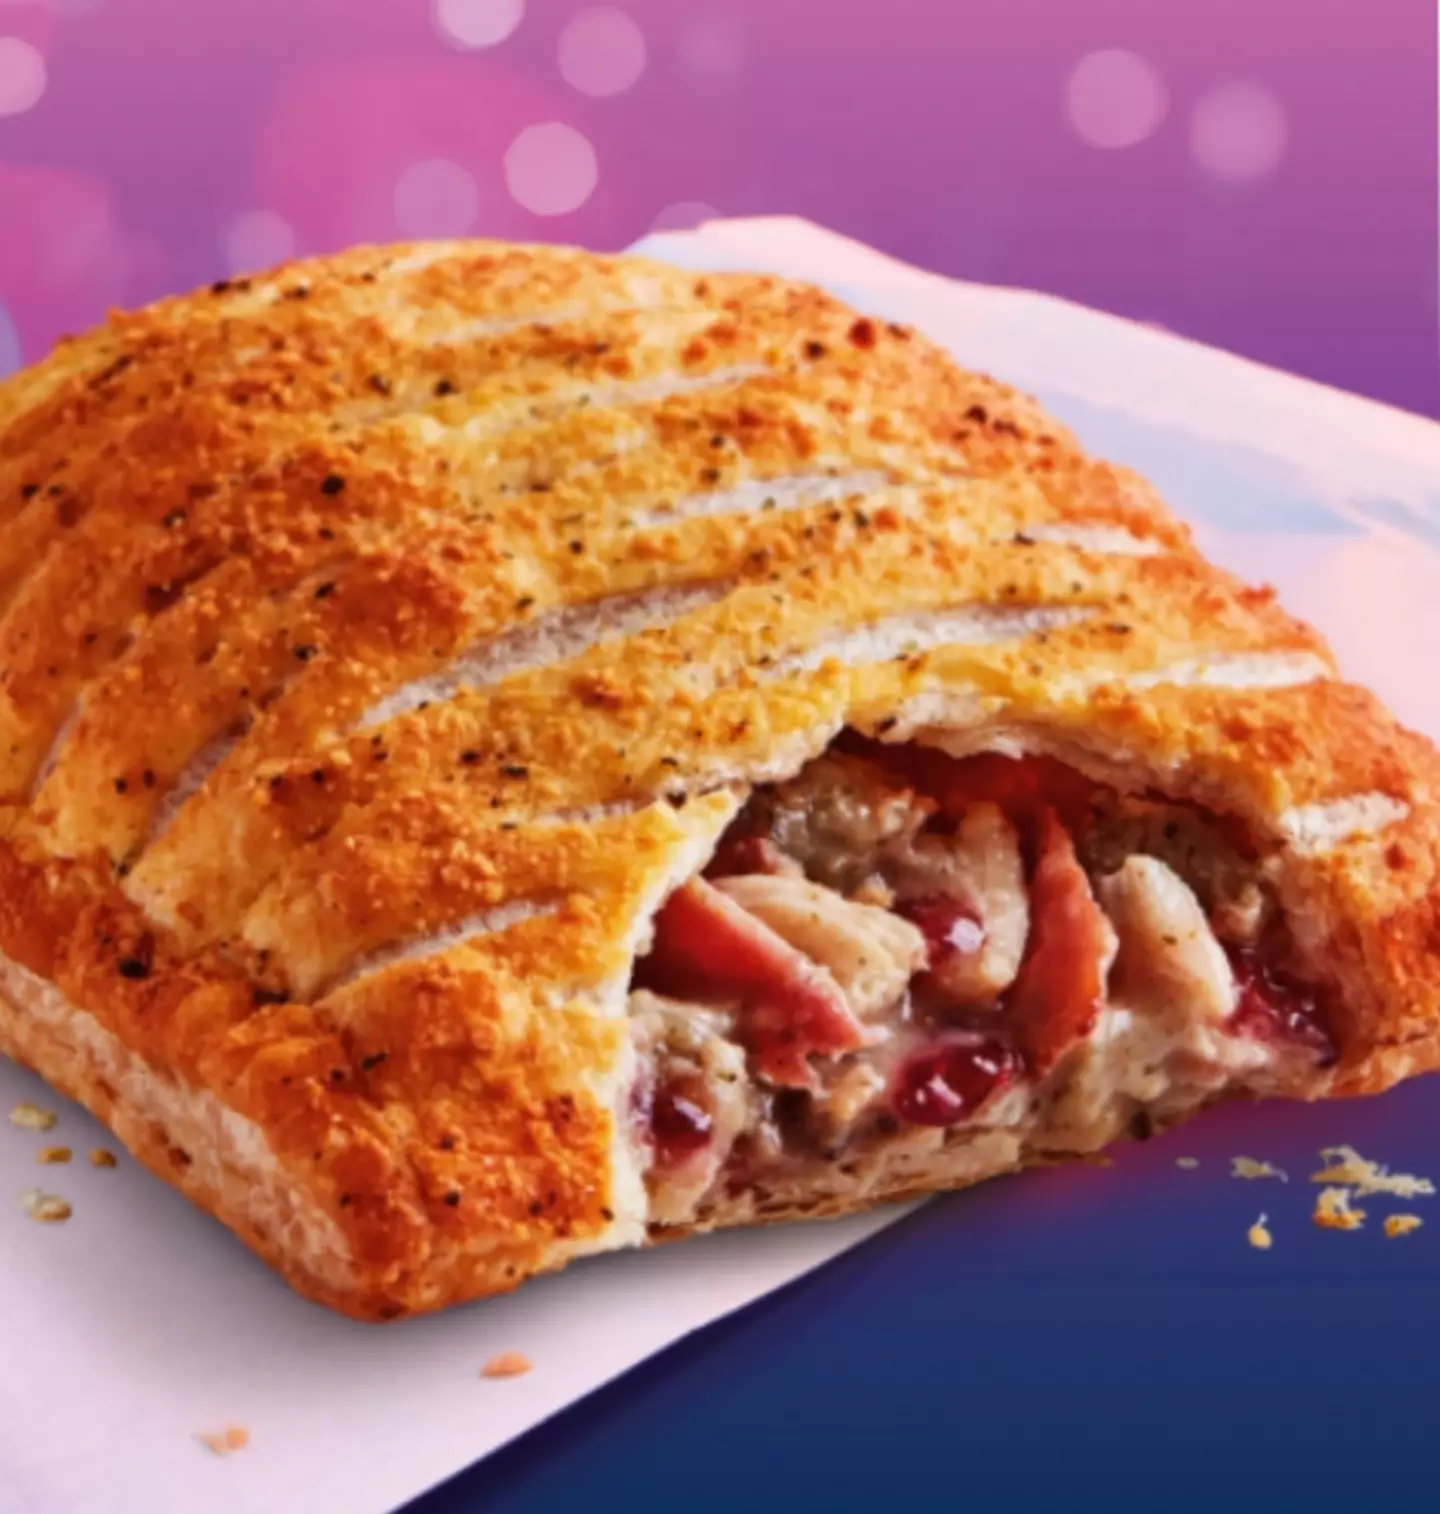 One of Greggs' festive favourites is now available to buy frozen from a major UK supermarket chain.